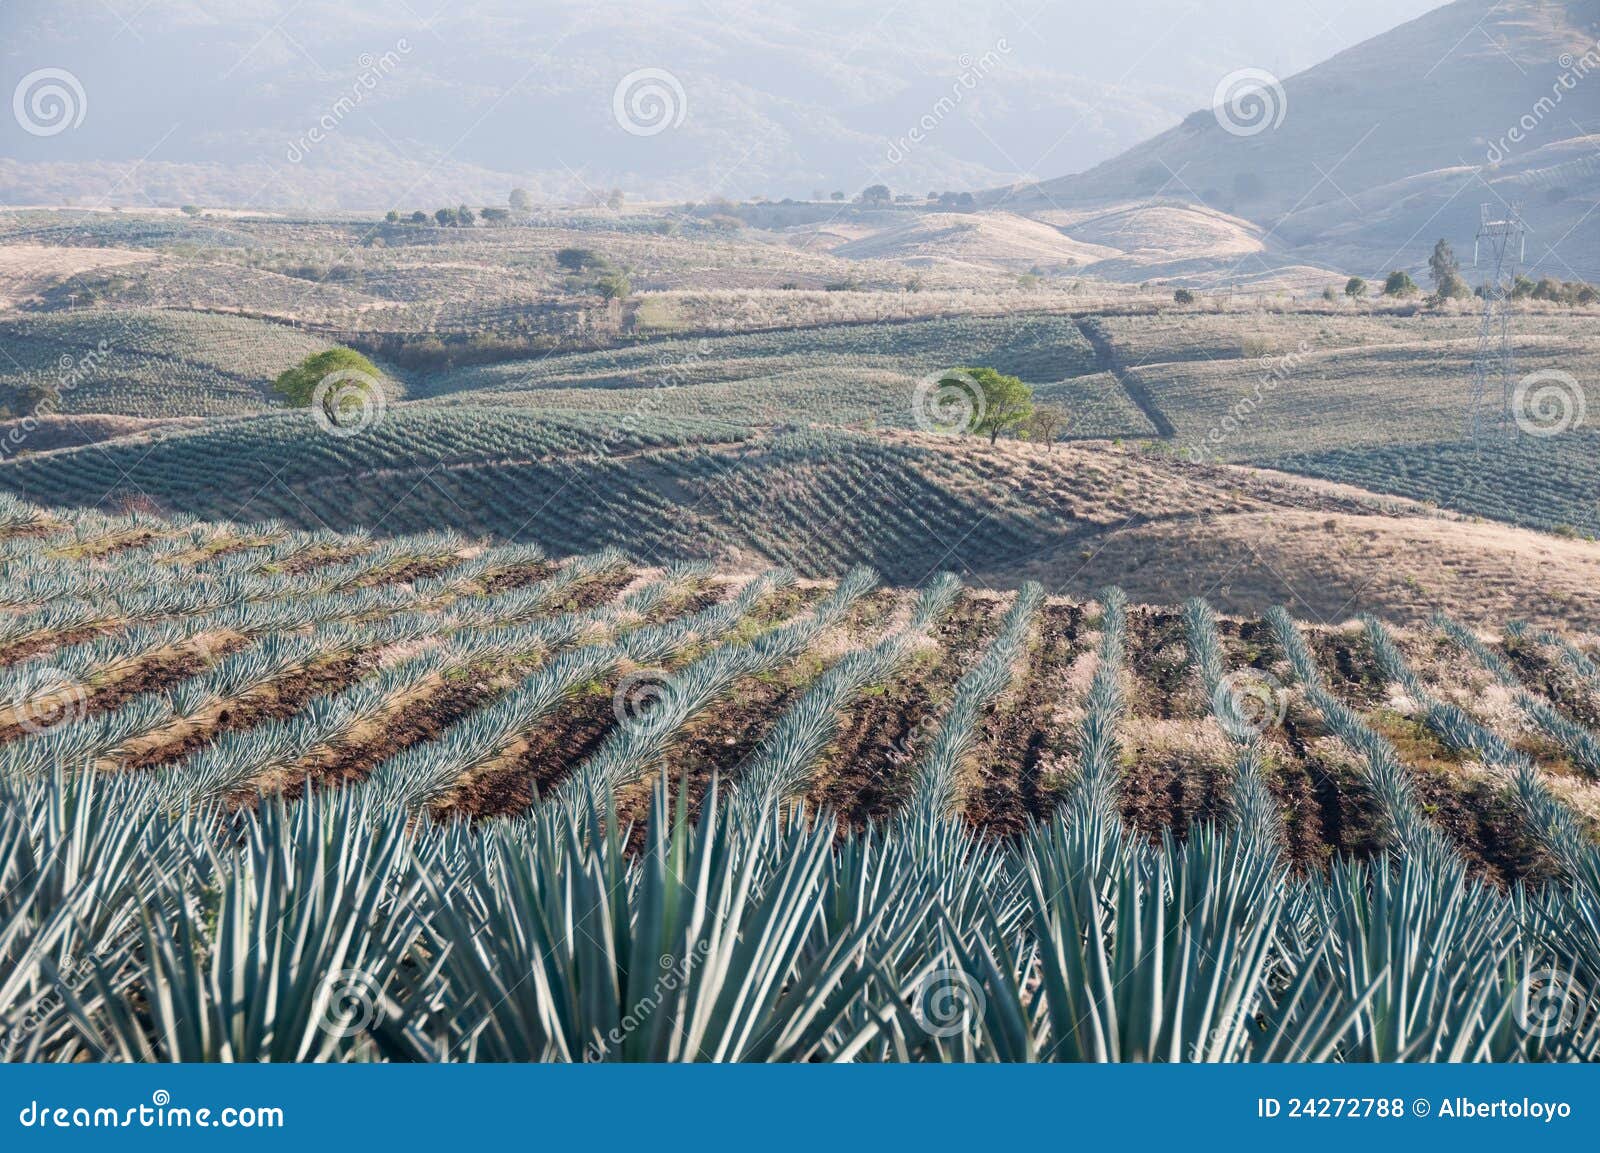 agave field in tequila, mexico